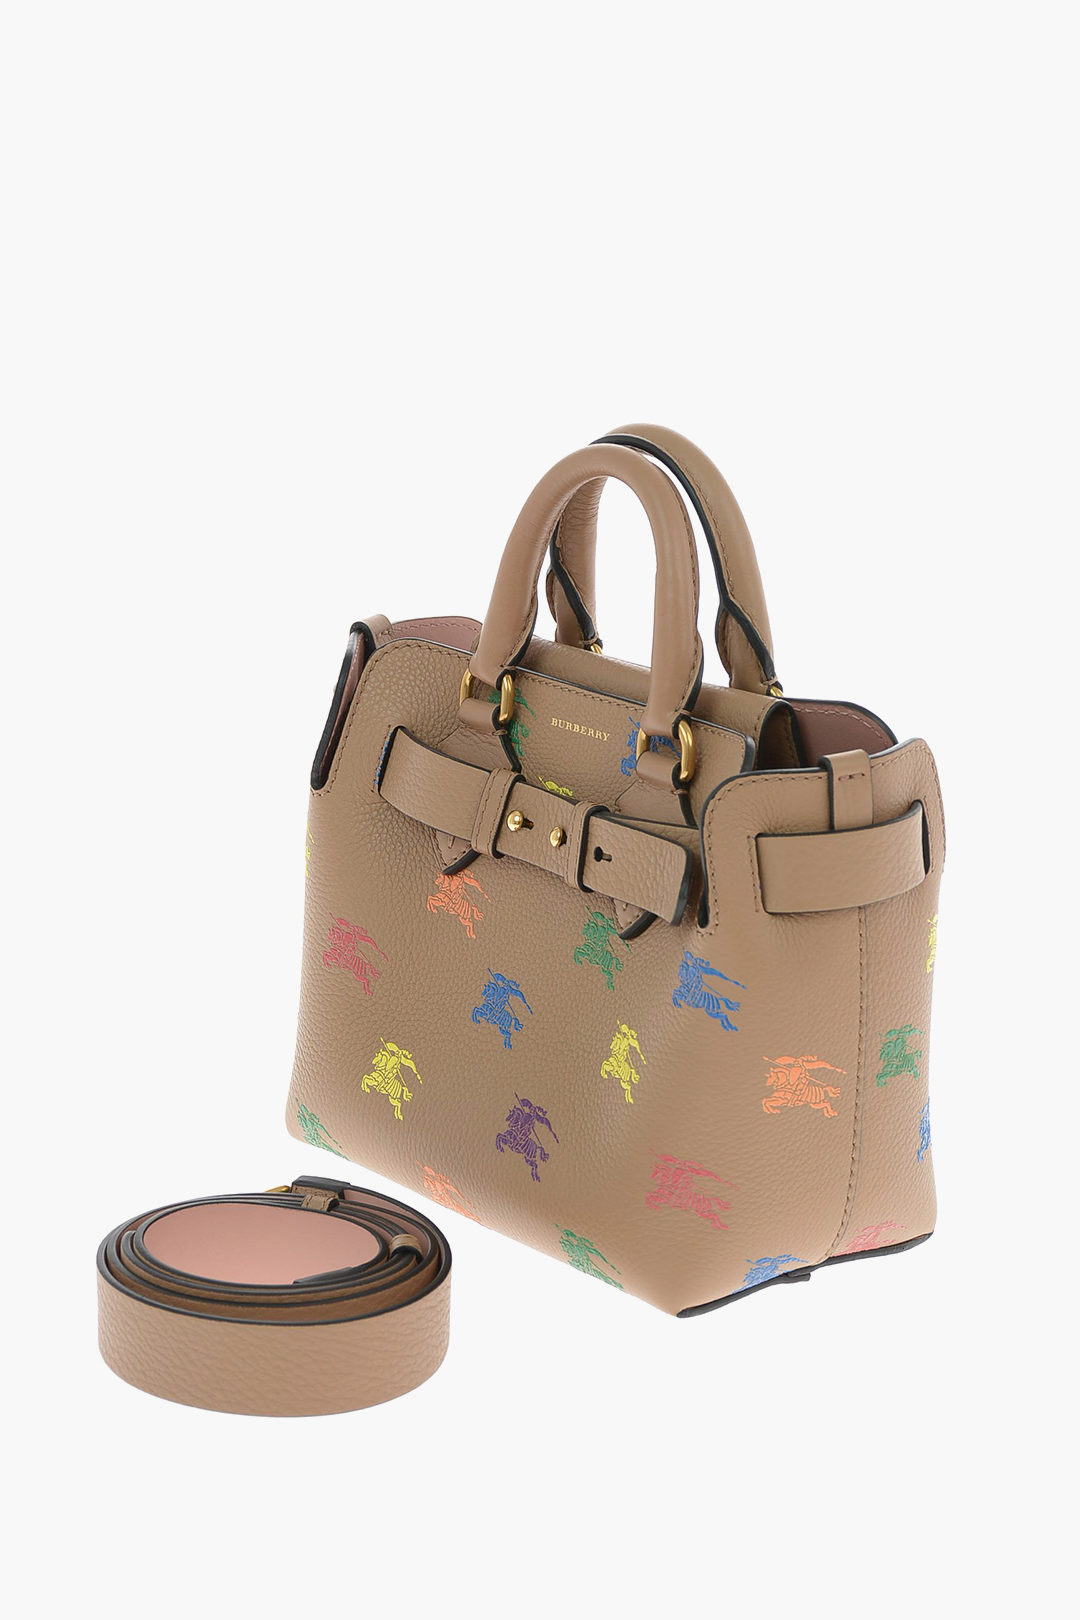 voormalig voor afvoer Burberry HORSE RAINBOW Printed Leather BABY BELT Tote Bag women - Glamood  Outlet